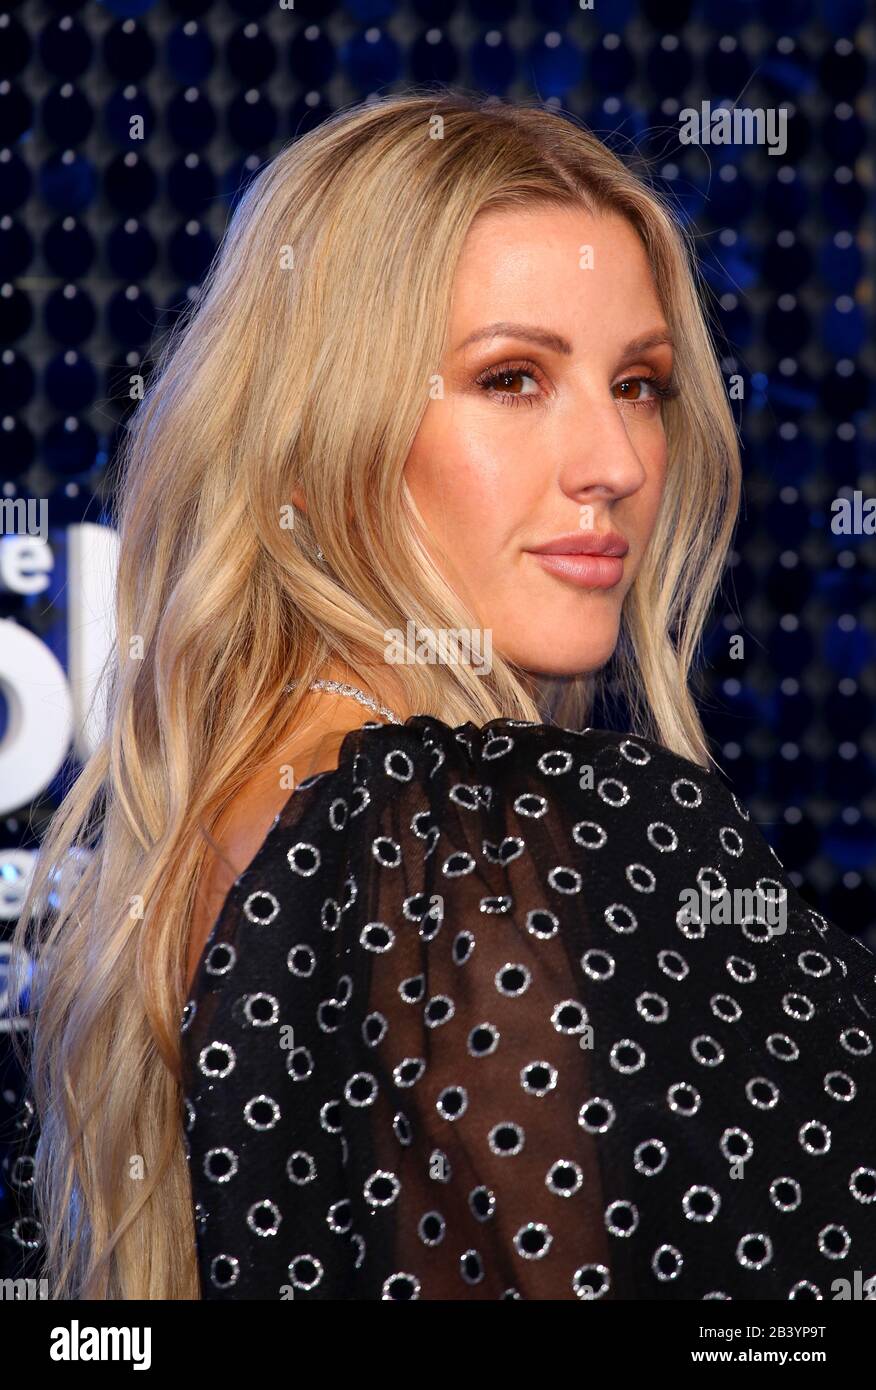 Ellie Goulding attends The Global Awards 2020 with Very.co.uk at London's Eventim Apollo Hammersmith. Stock Photo